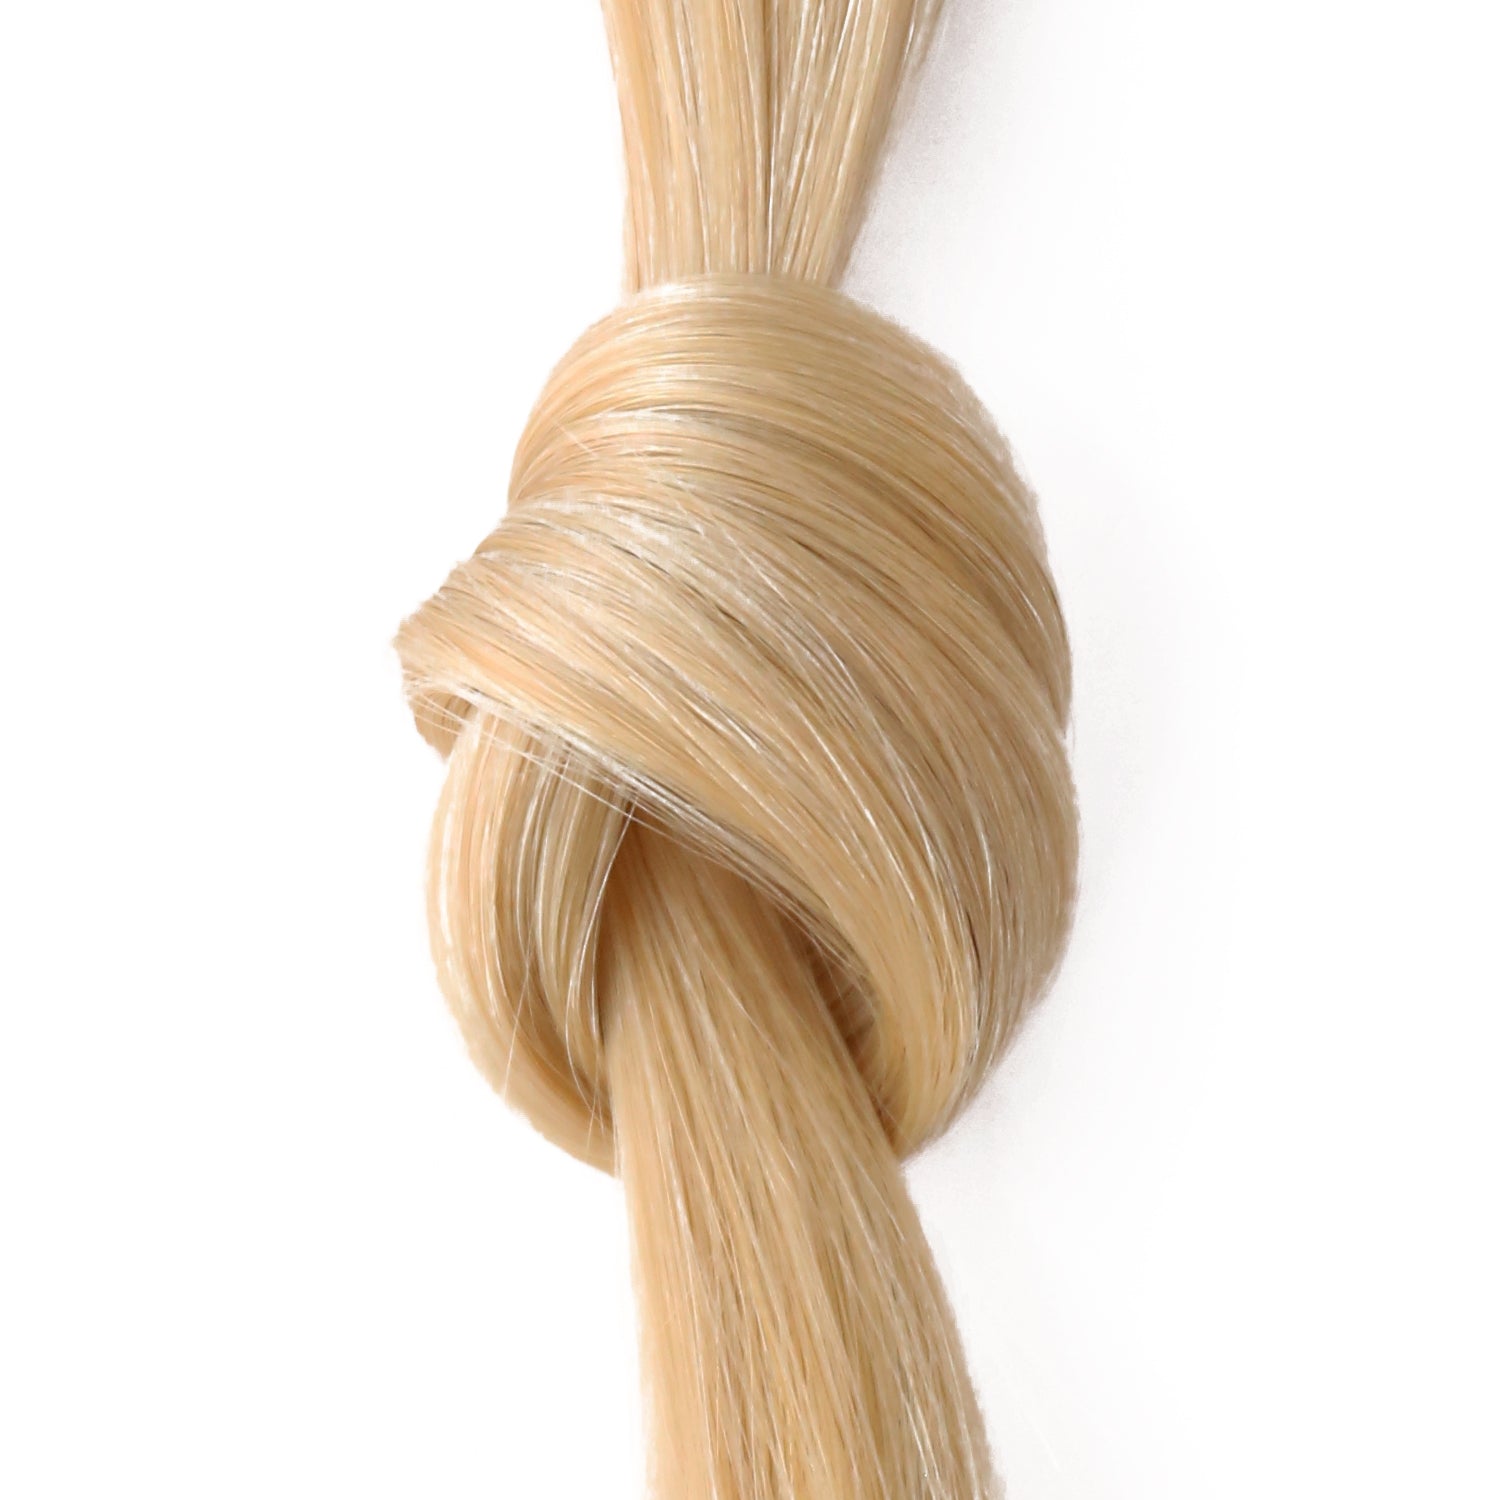 23 - Prime Tape In Platinum Icy Blonde - True chromatic and universally rich shades of natural color.